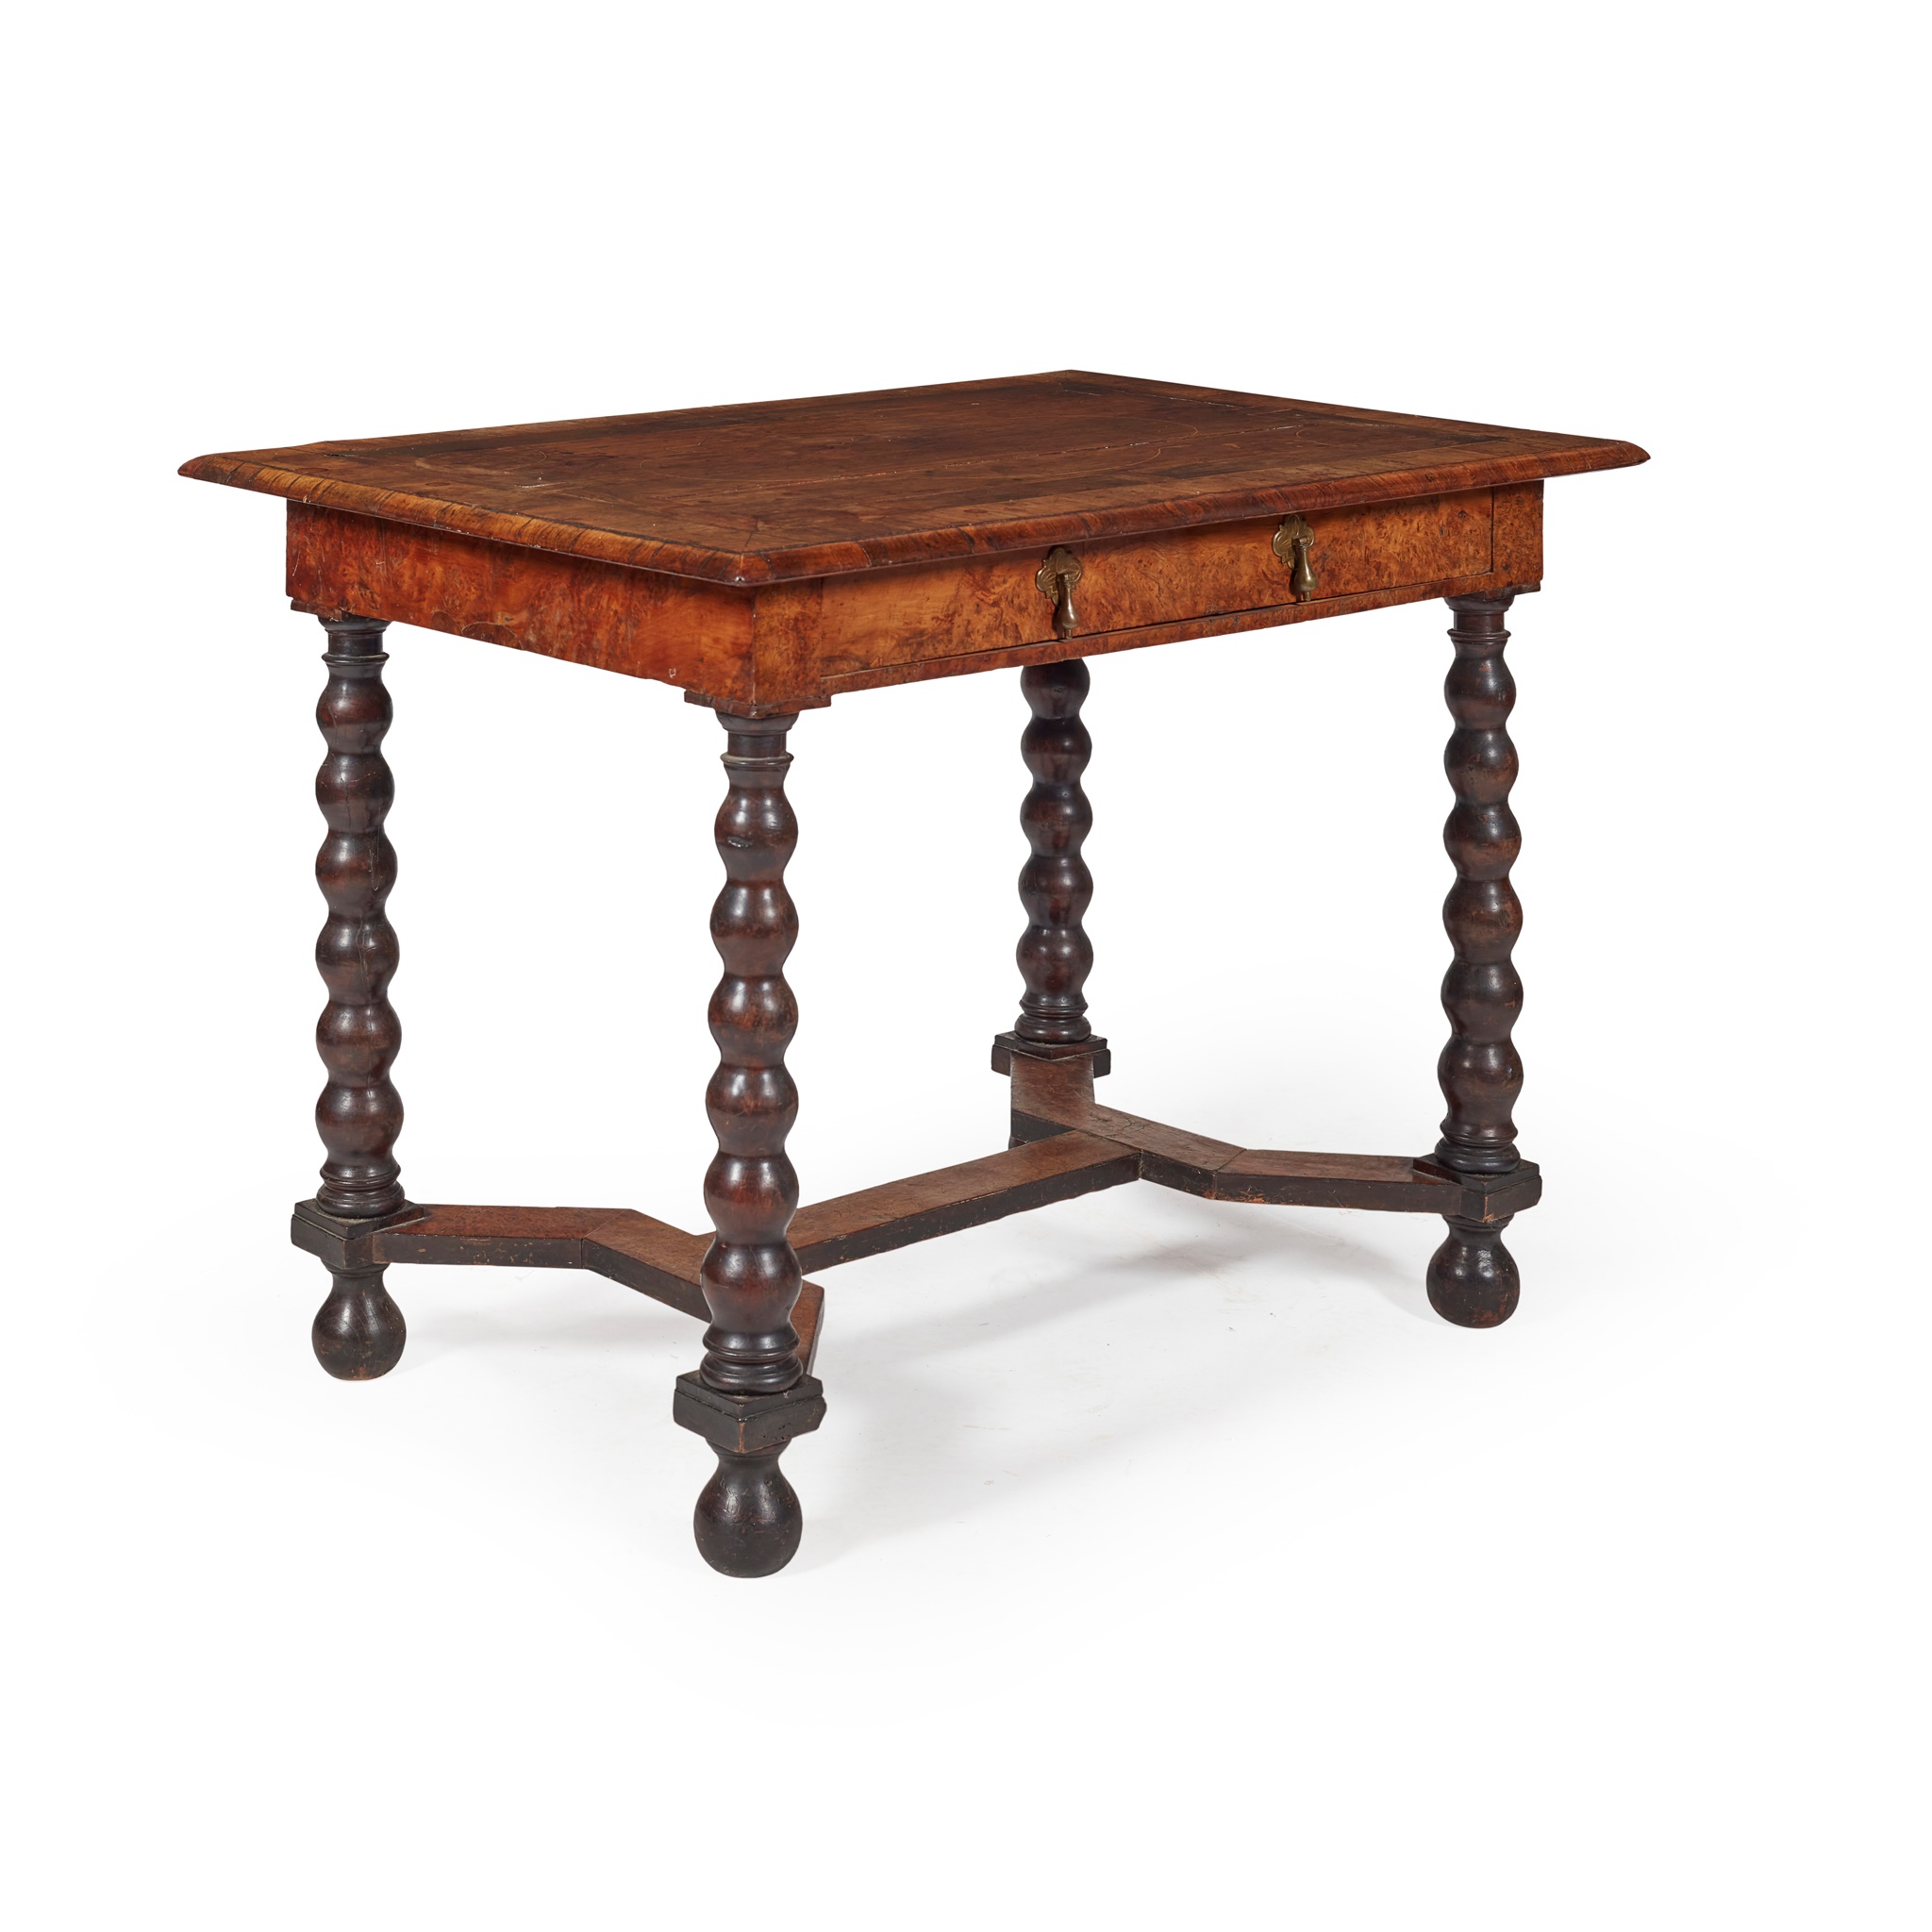 WILLIAM AND MARY WALNUT TABLE 17TH CENTURY